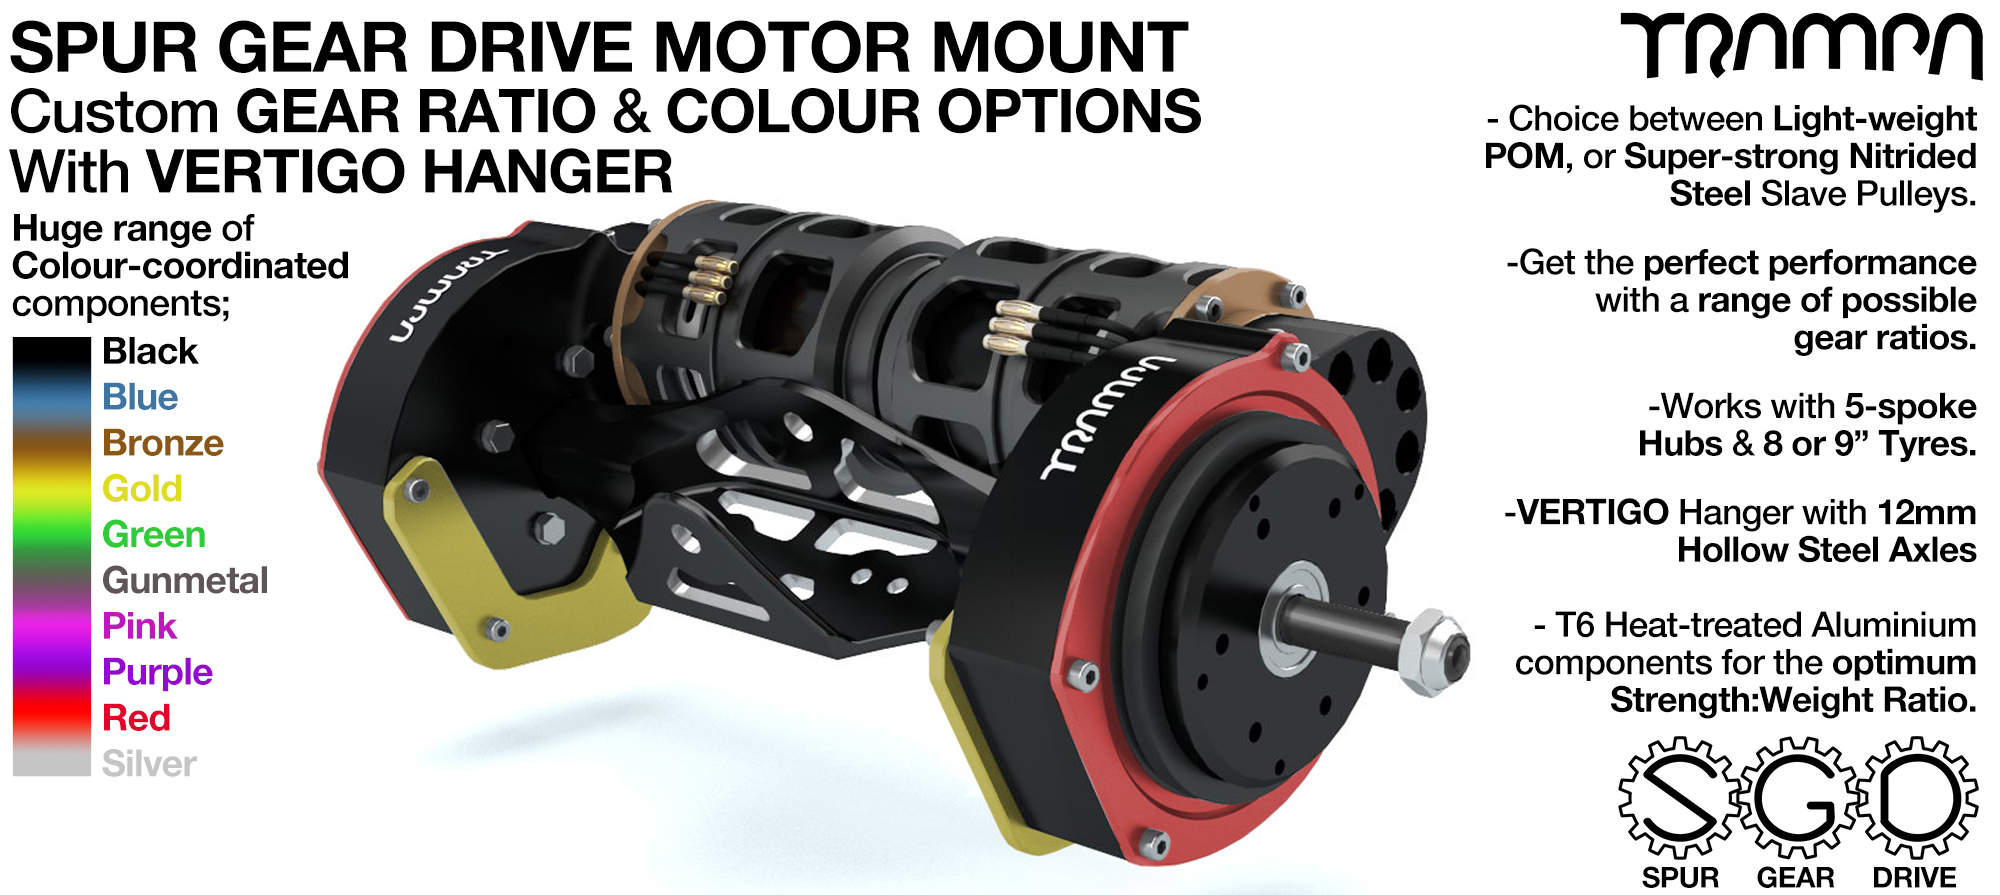 Spur Gear Drive TWIN Motor Mount with PULLEYS, FILTERS & MOTORS assembled onto a Hanger